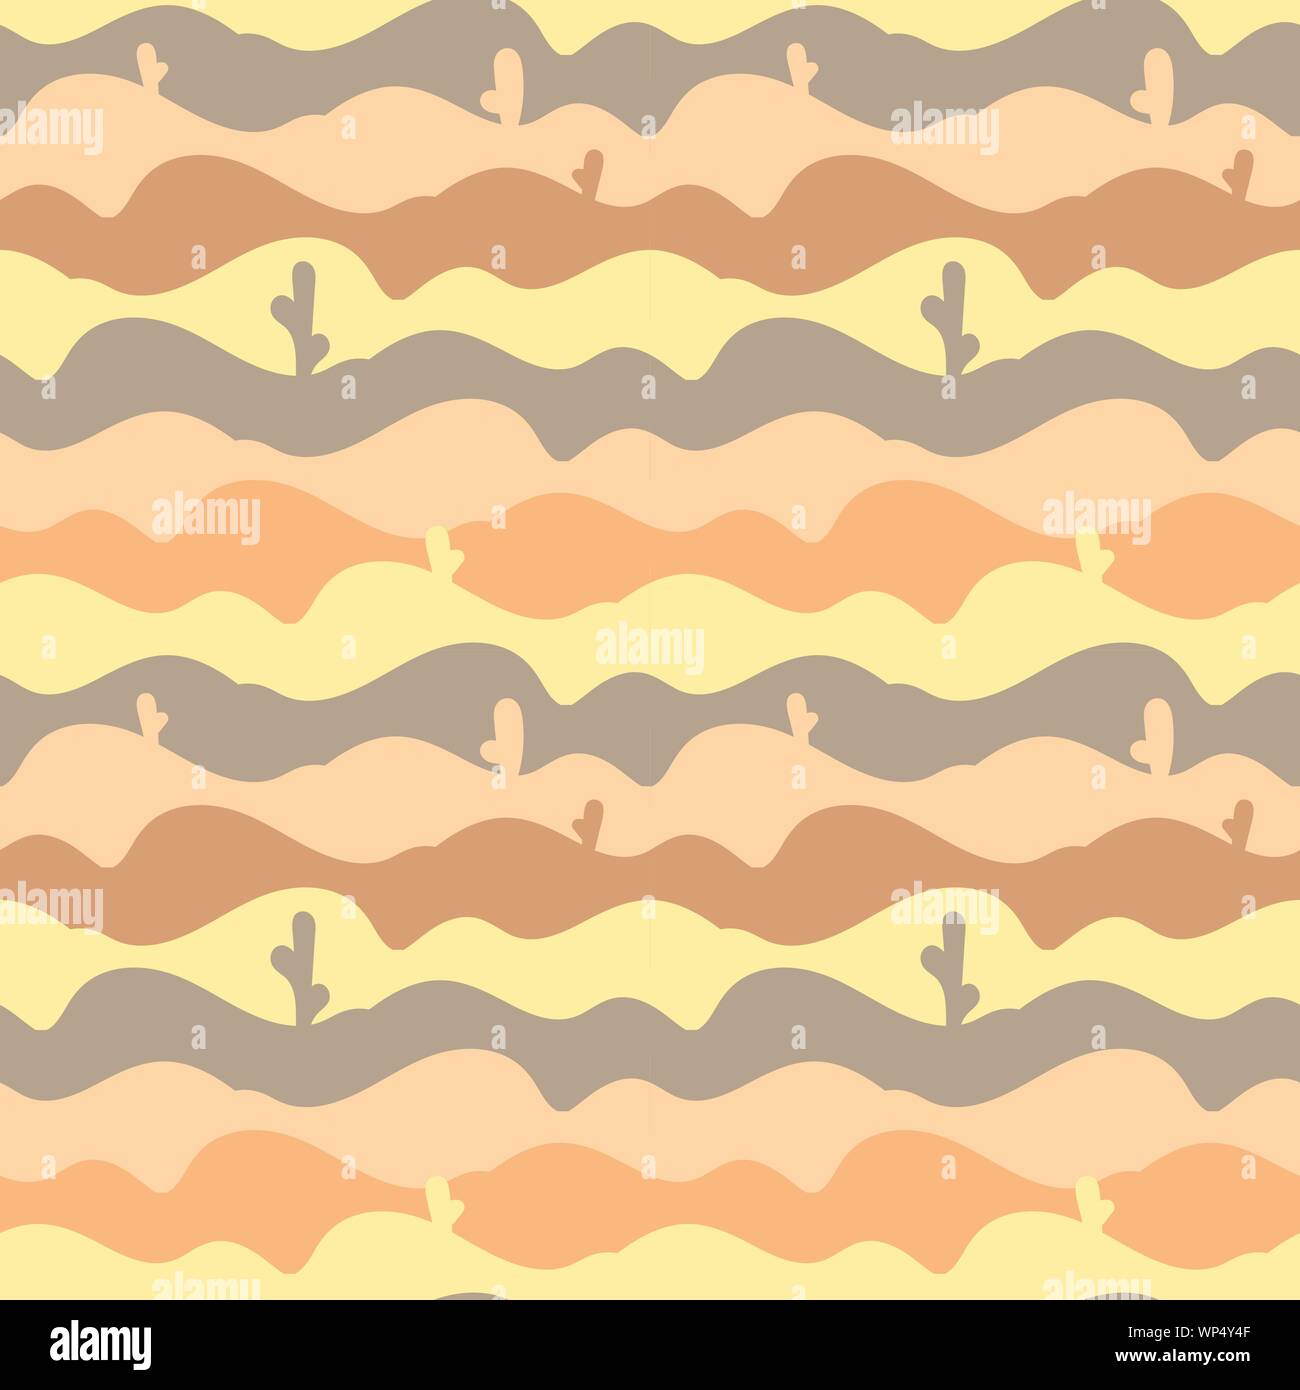 seamless vector yellow pattern with desert landscape Stock Vector